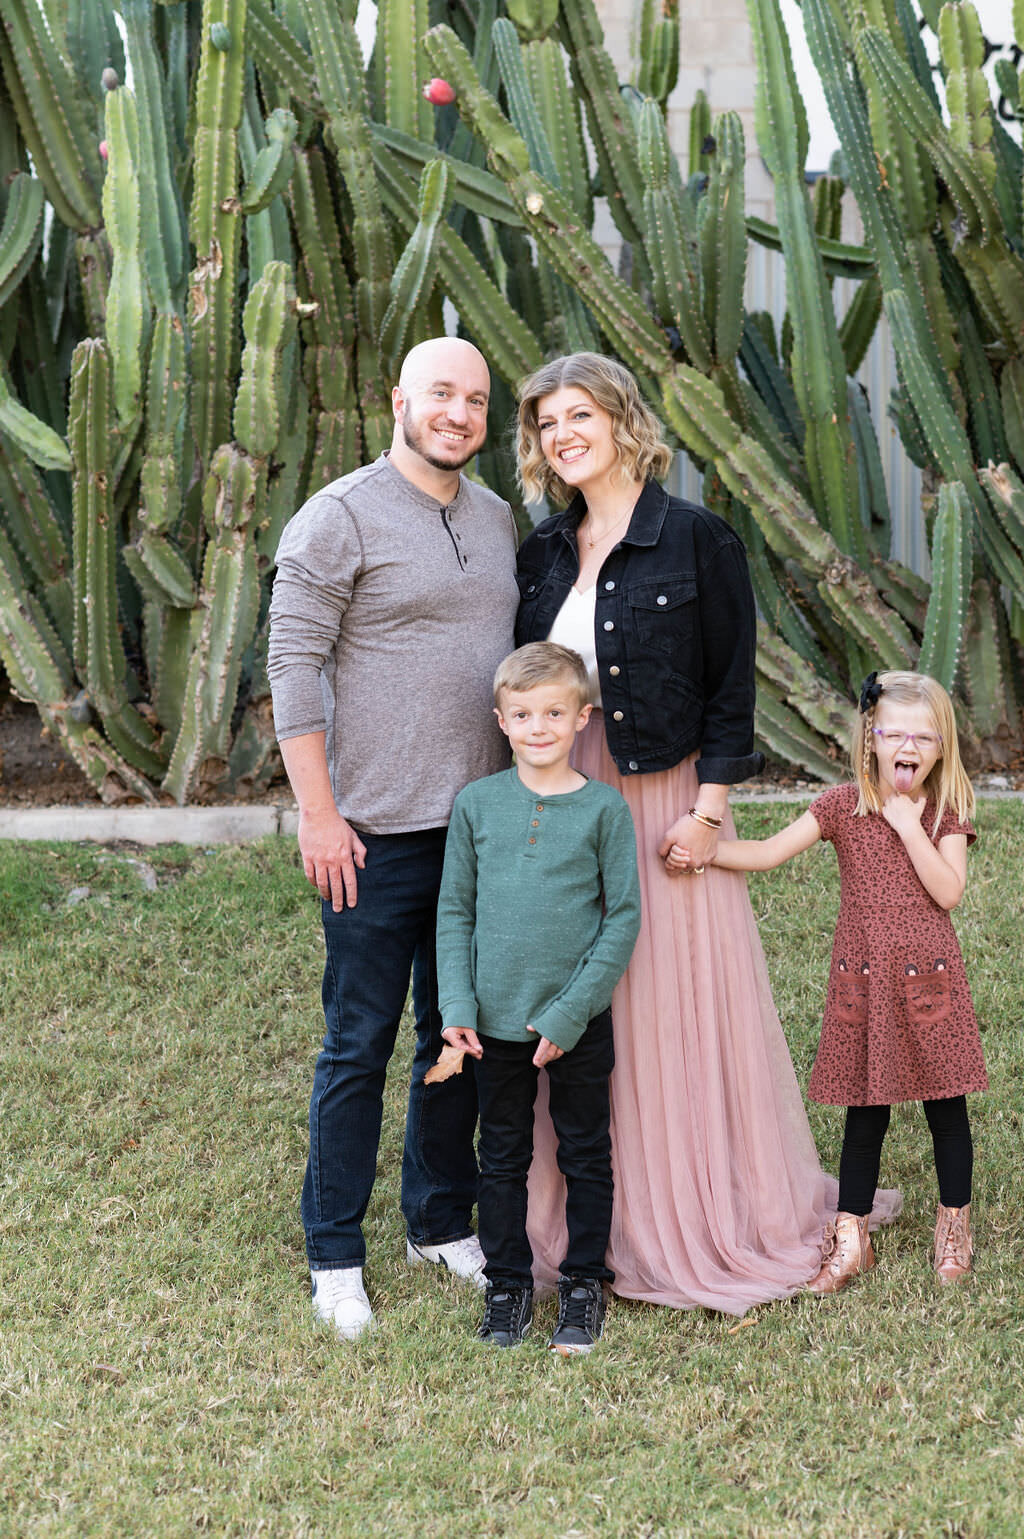 A small family standing in their yard smiling with cacti behind them.